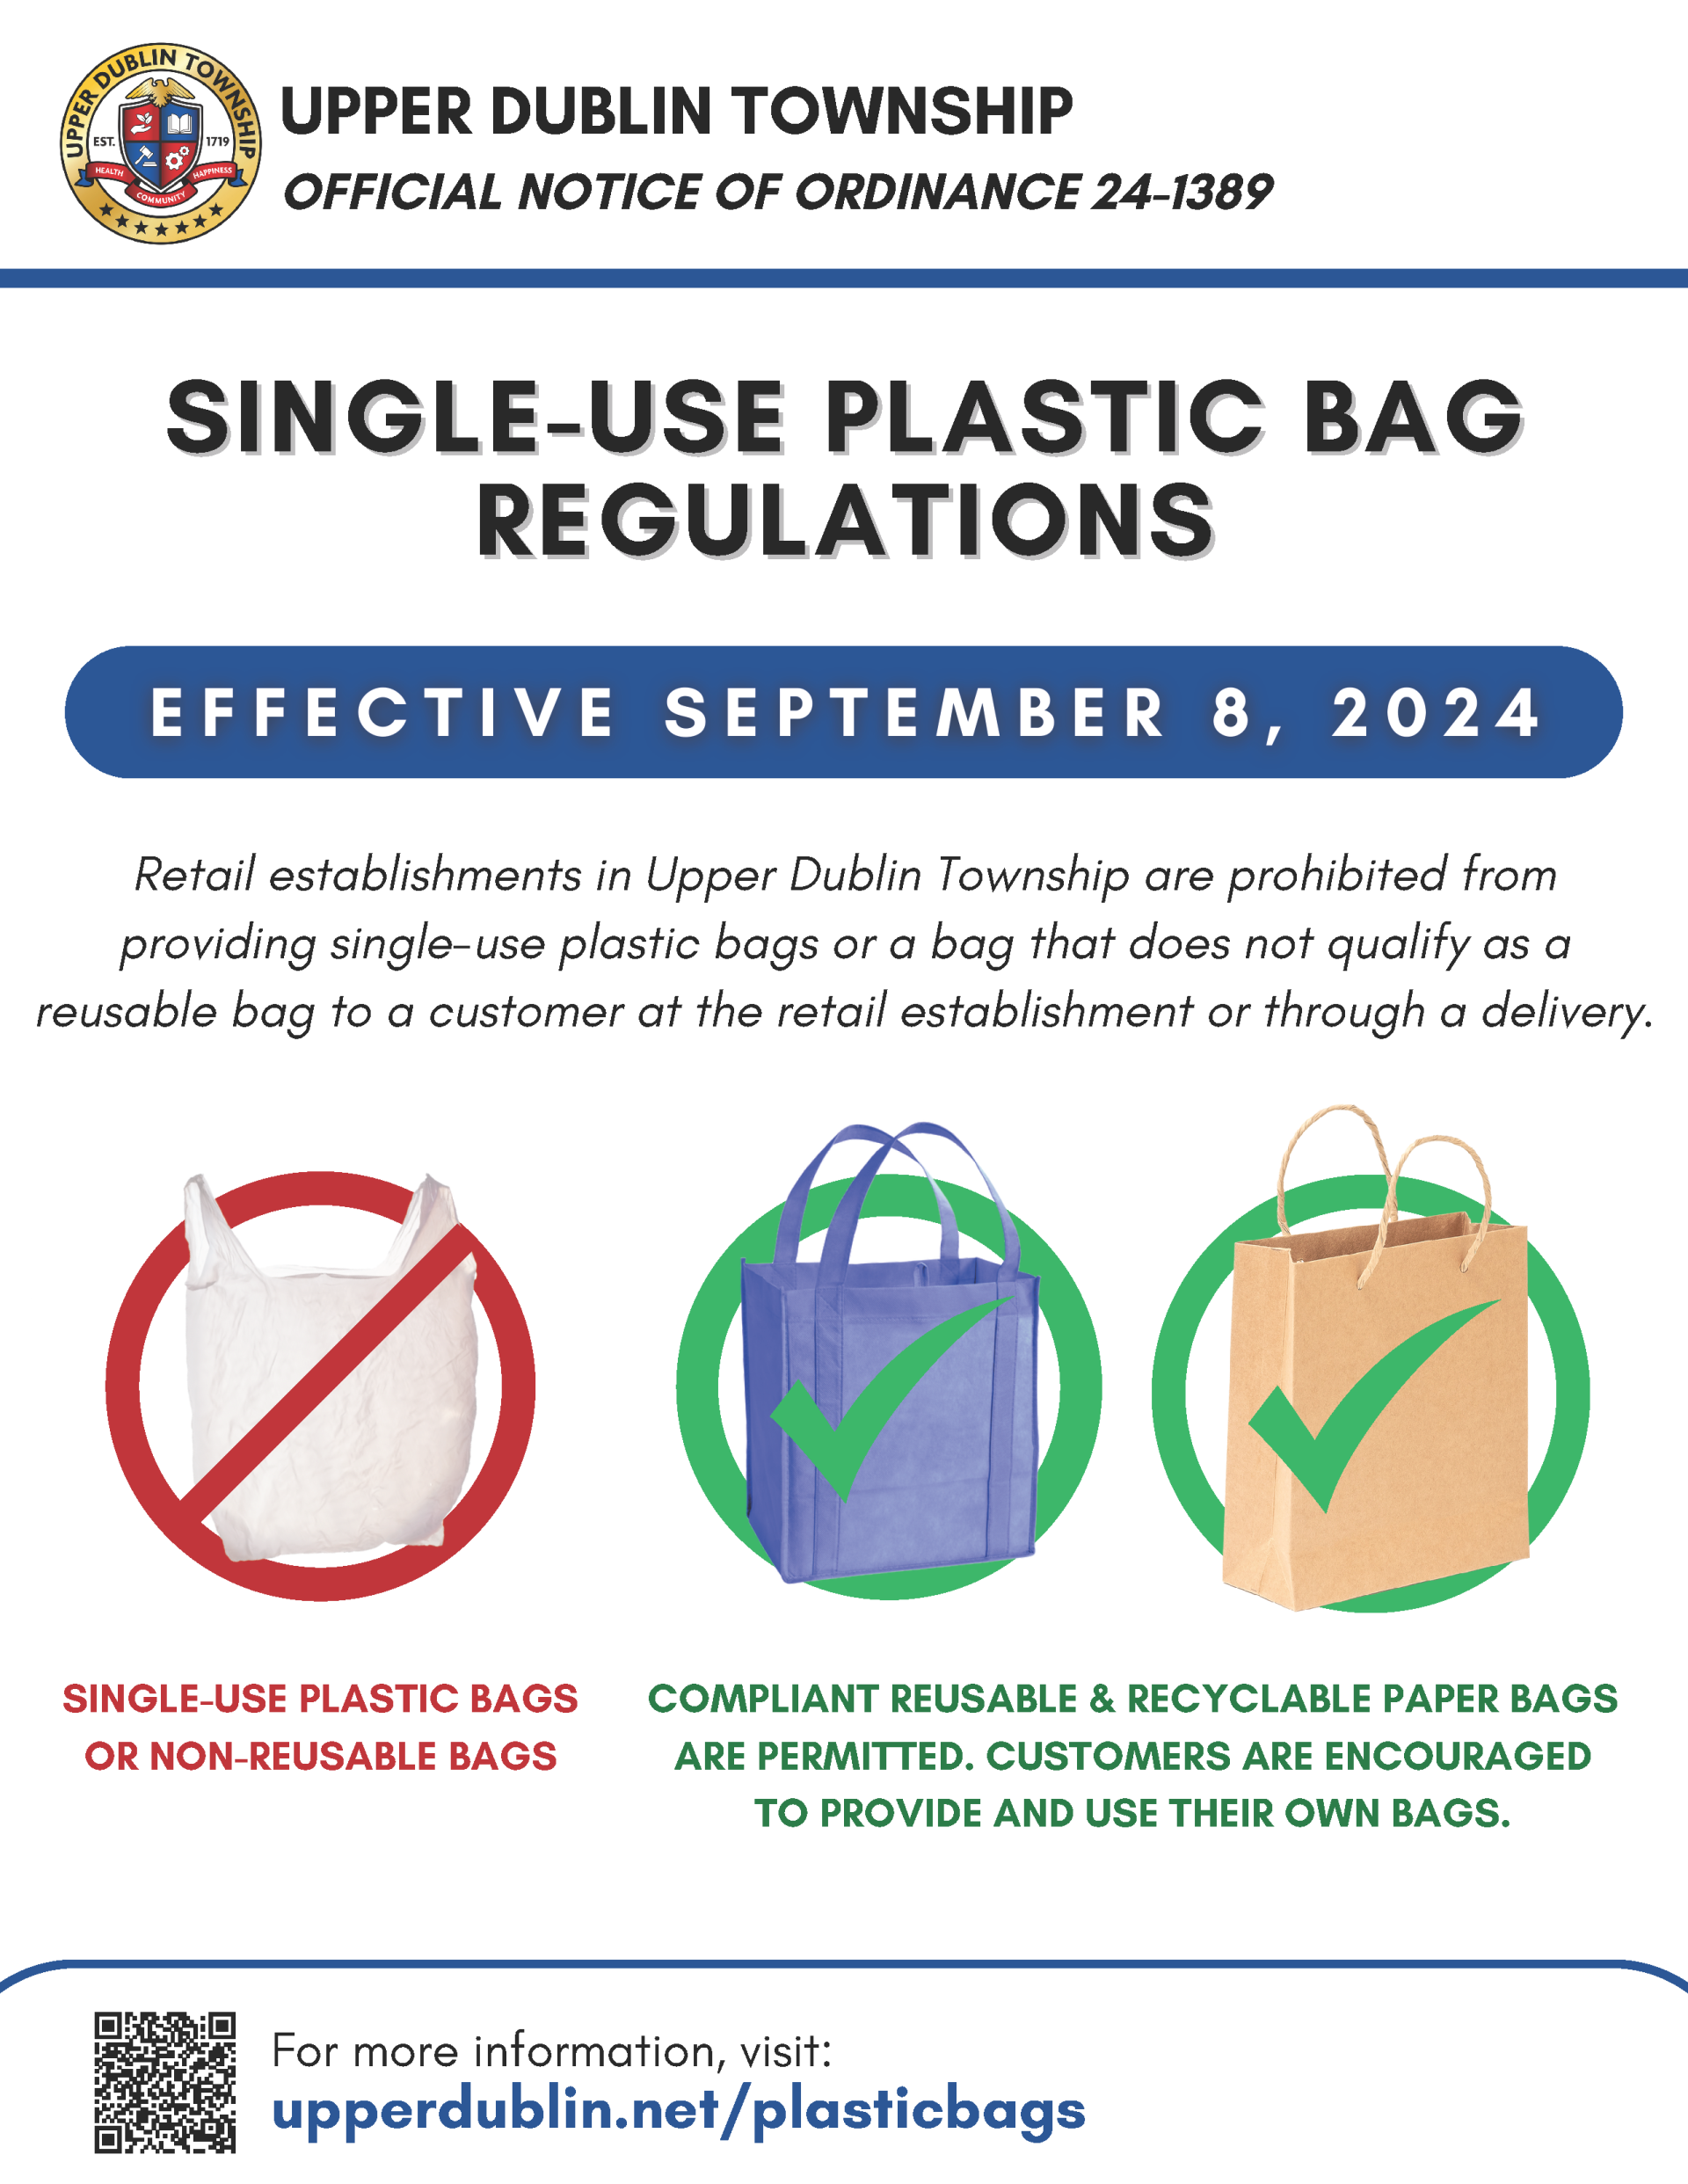 single use plastic bag regulation flyer - no single use plastic bags. reusable canvas tote and recyclable paper bags are permitted